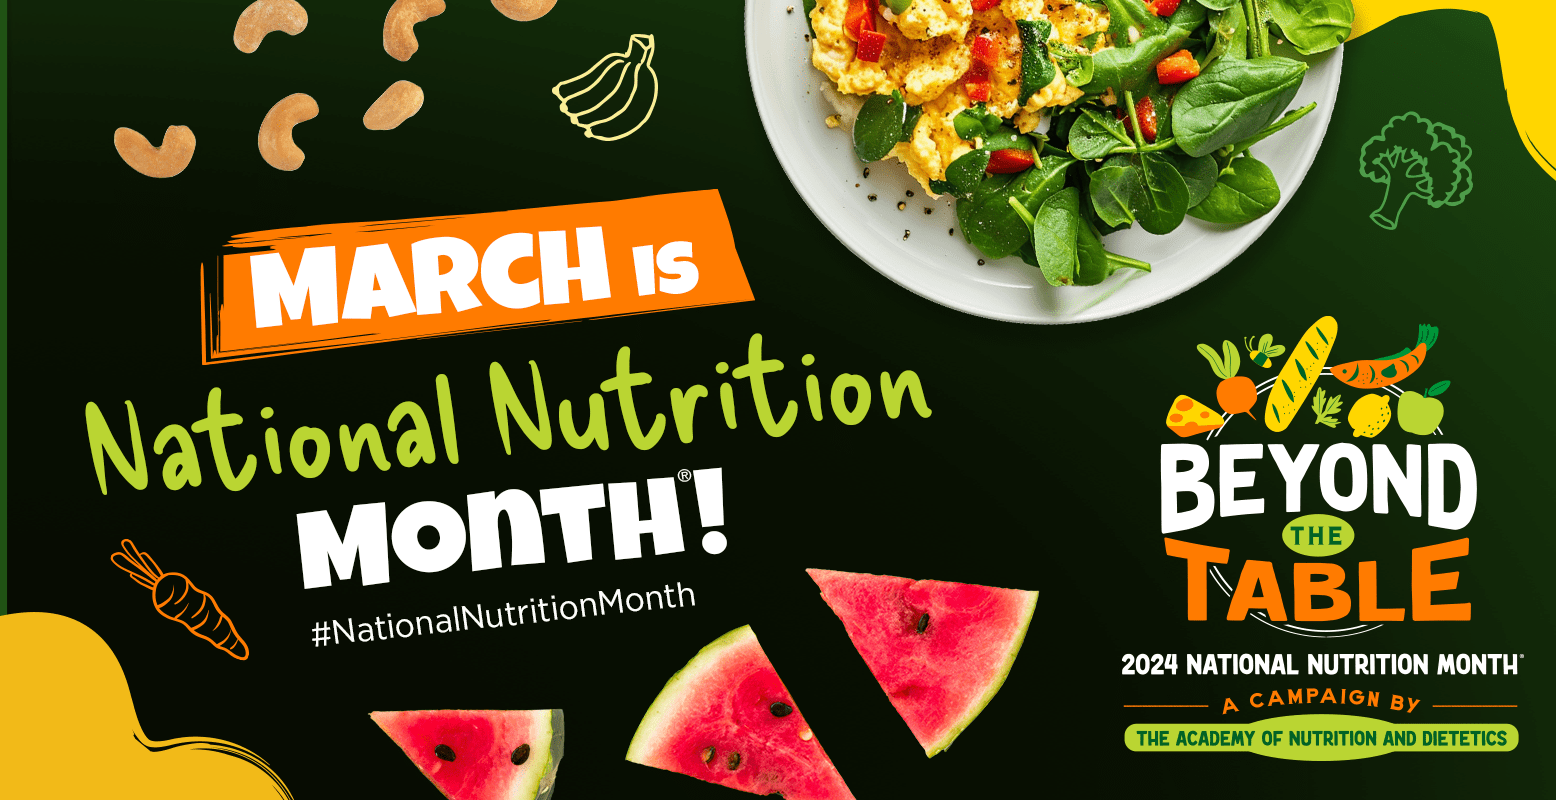 Mach in National Nutrition Month. This year's theme is "Beyond the Table."